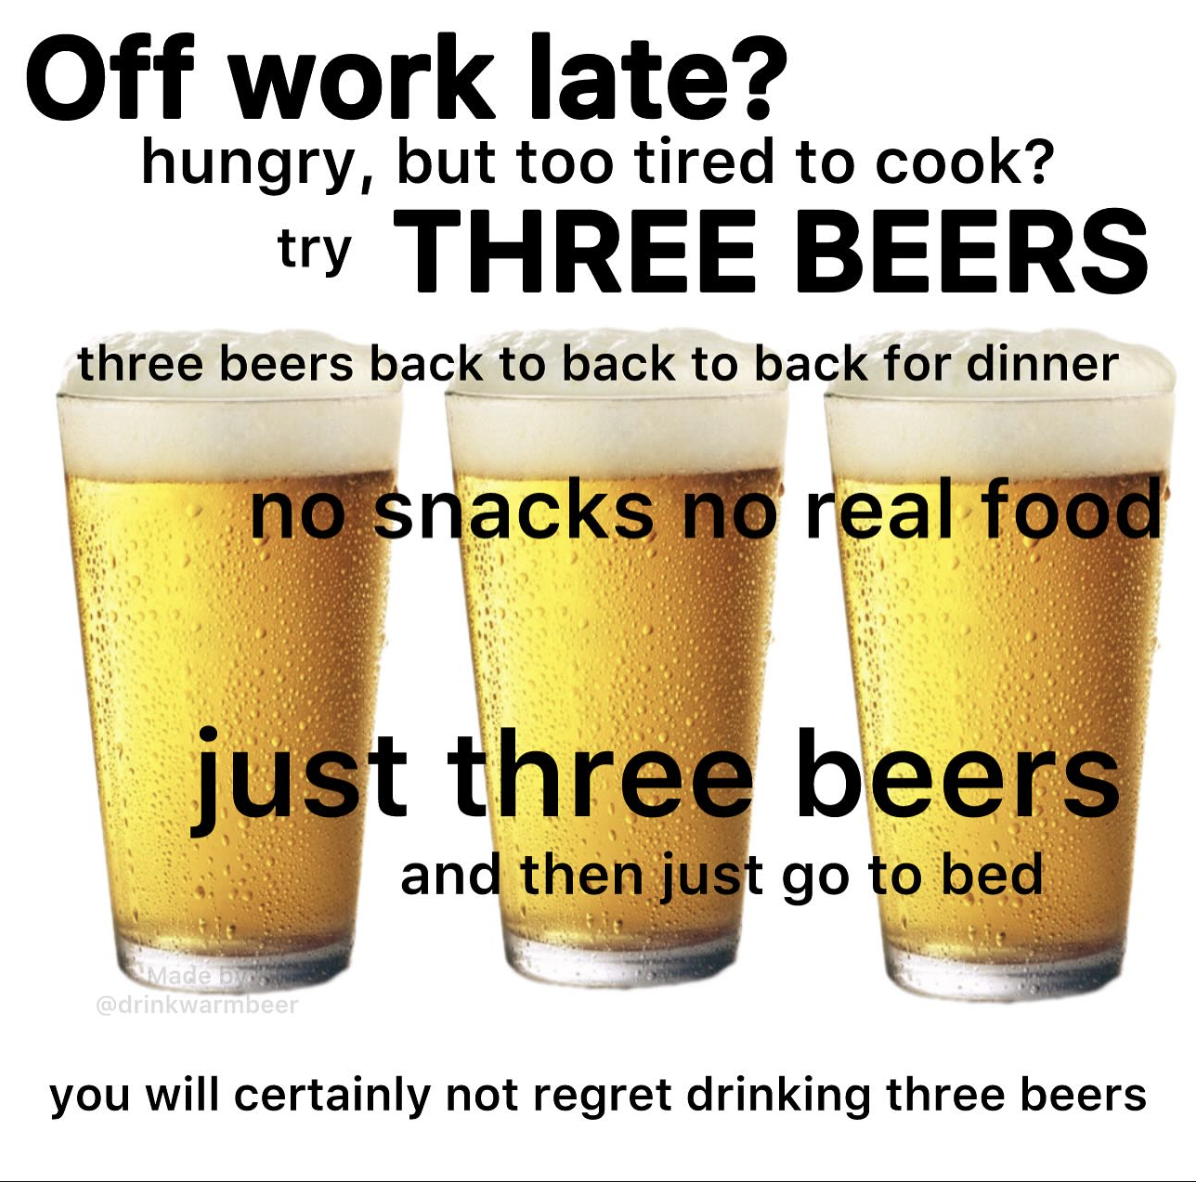 guinness - Off work late? hungry, but too tired to cook? try Three Beers three beers back to back to back for dinner no snacks no real food just three beers and then just go to bed drinkwarmbeer you will certainly not regret drinking three beers